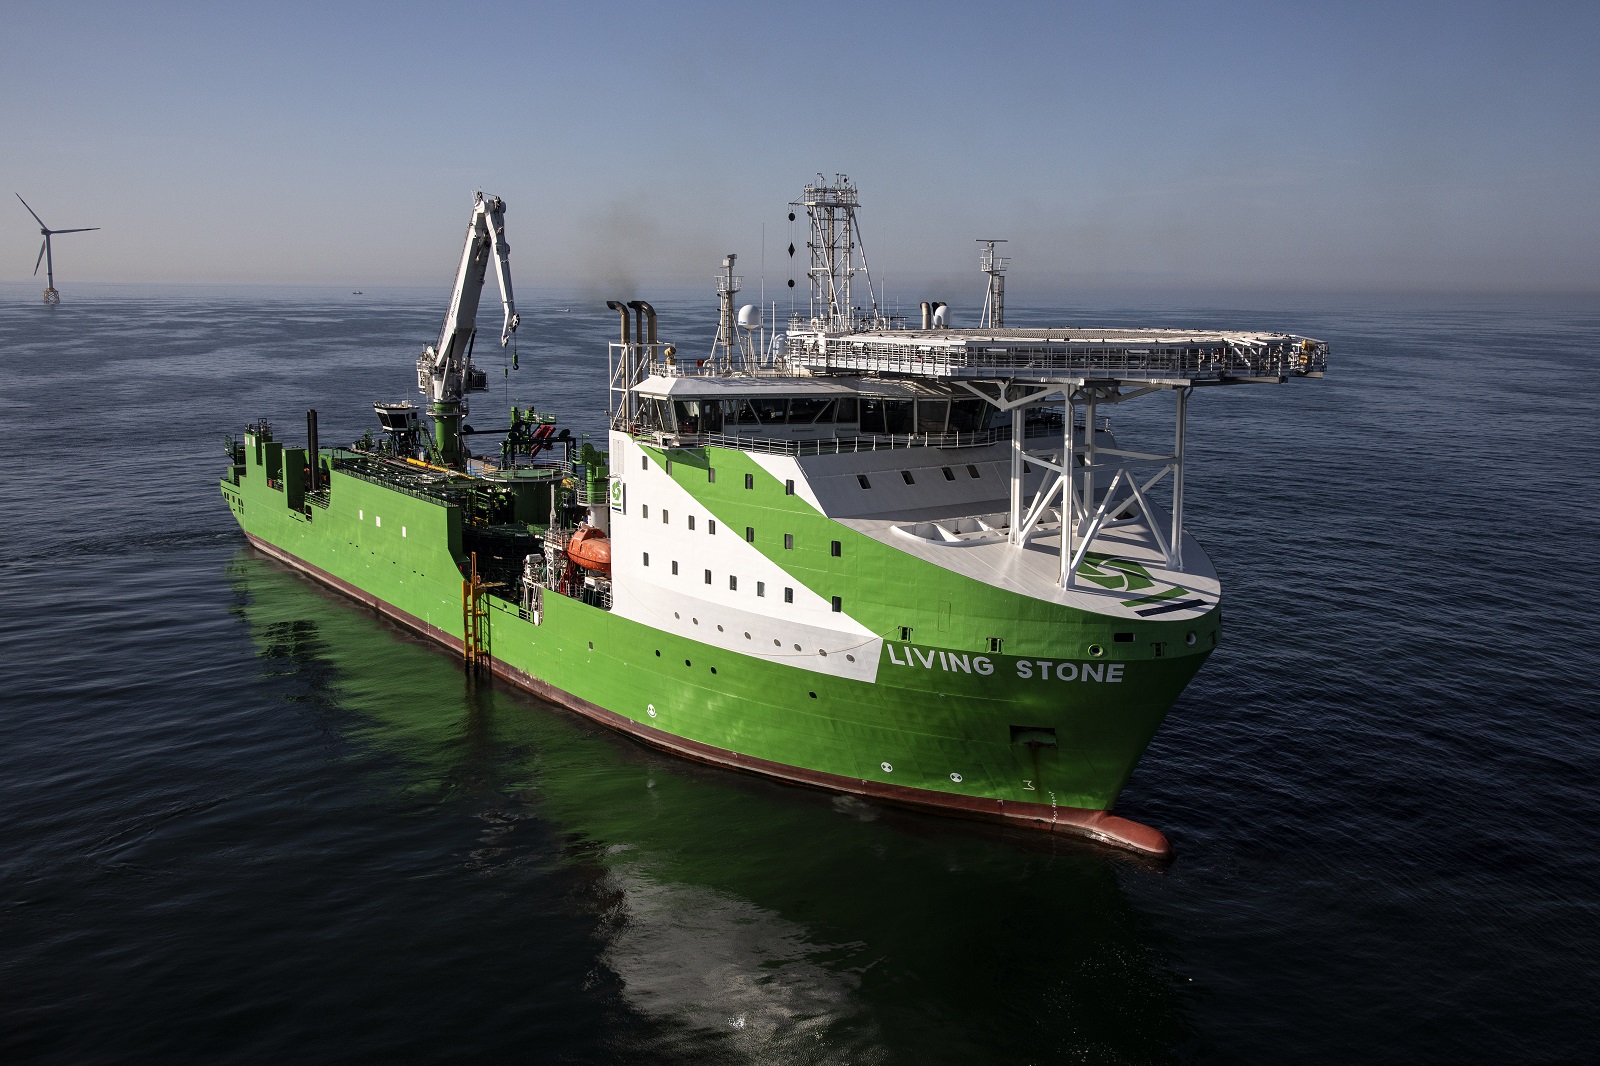 DEME Offshore awarded major EPCI cable contract for the Neart na Gaoithe offshore wind farm in Scotland